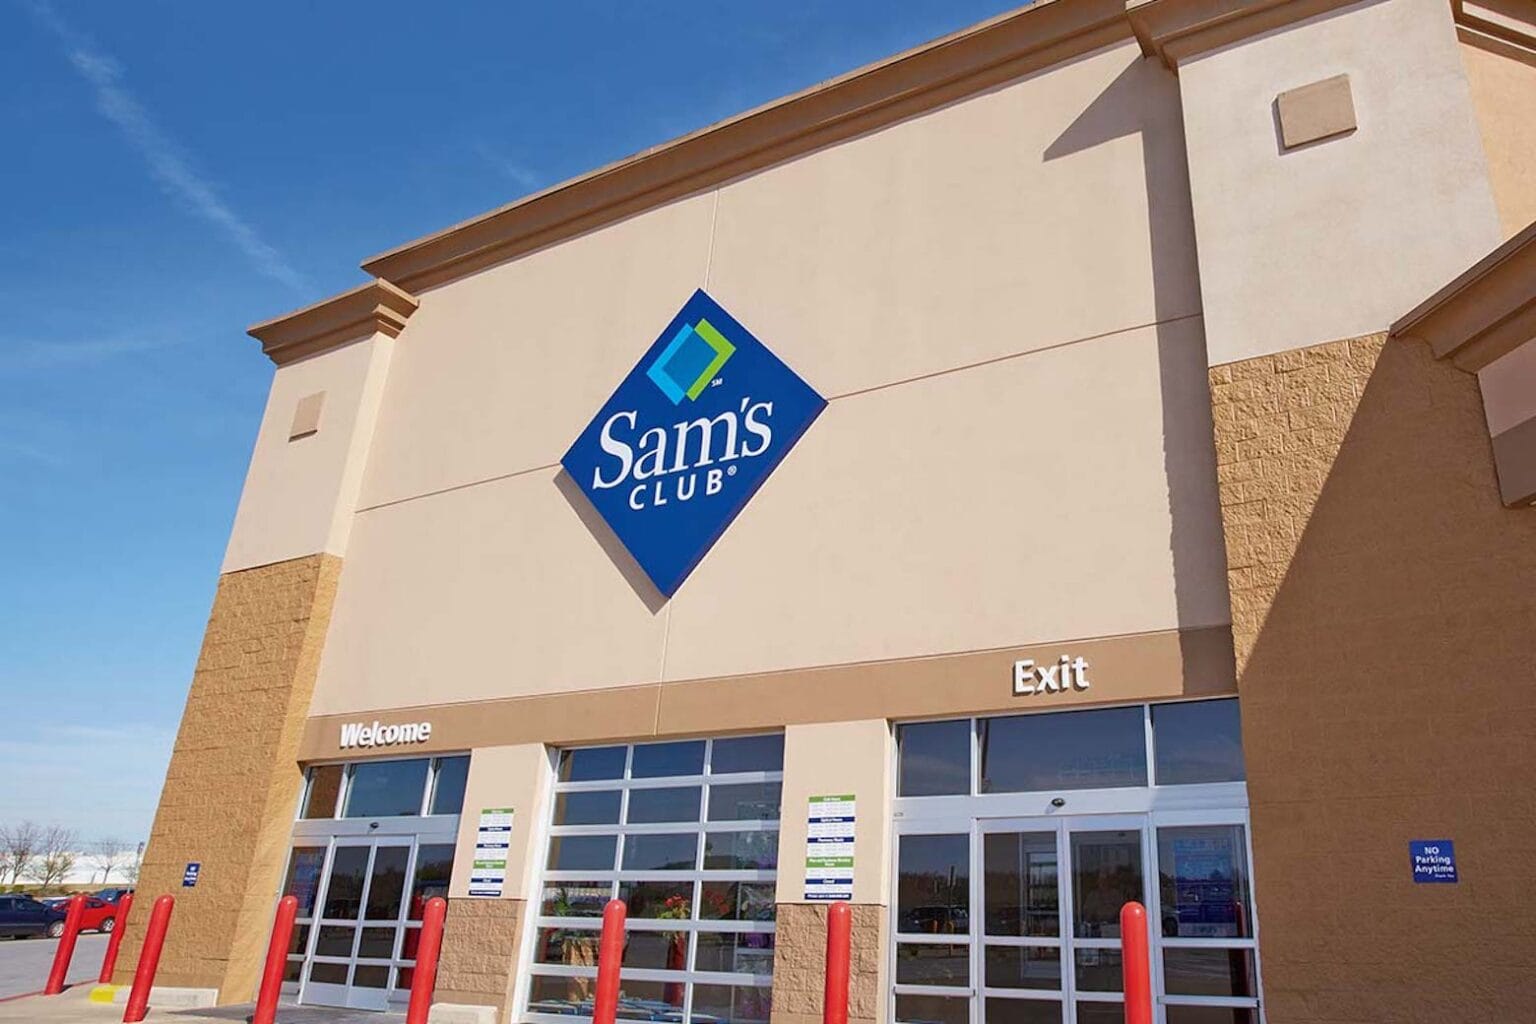 Shop until you drop with this $24.88 membership to Sam's Club.